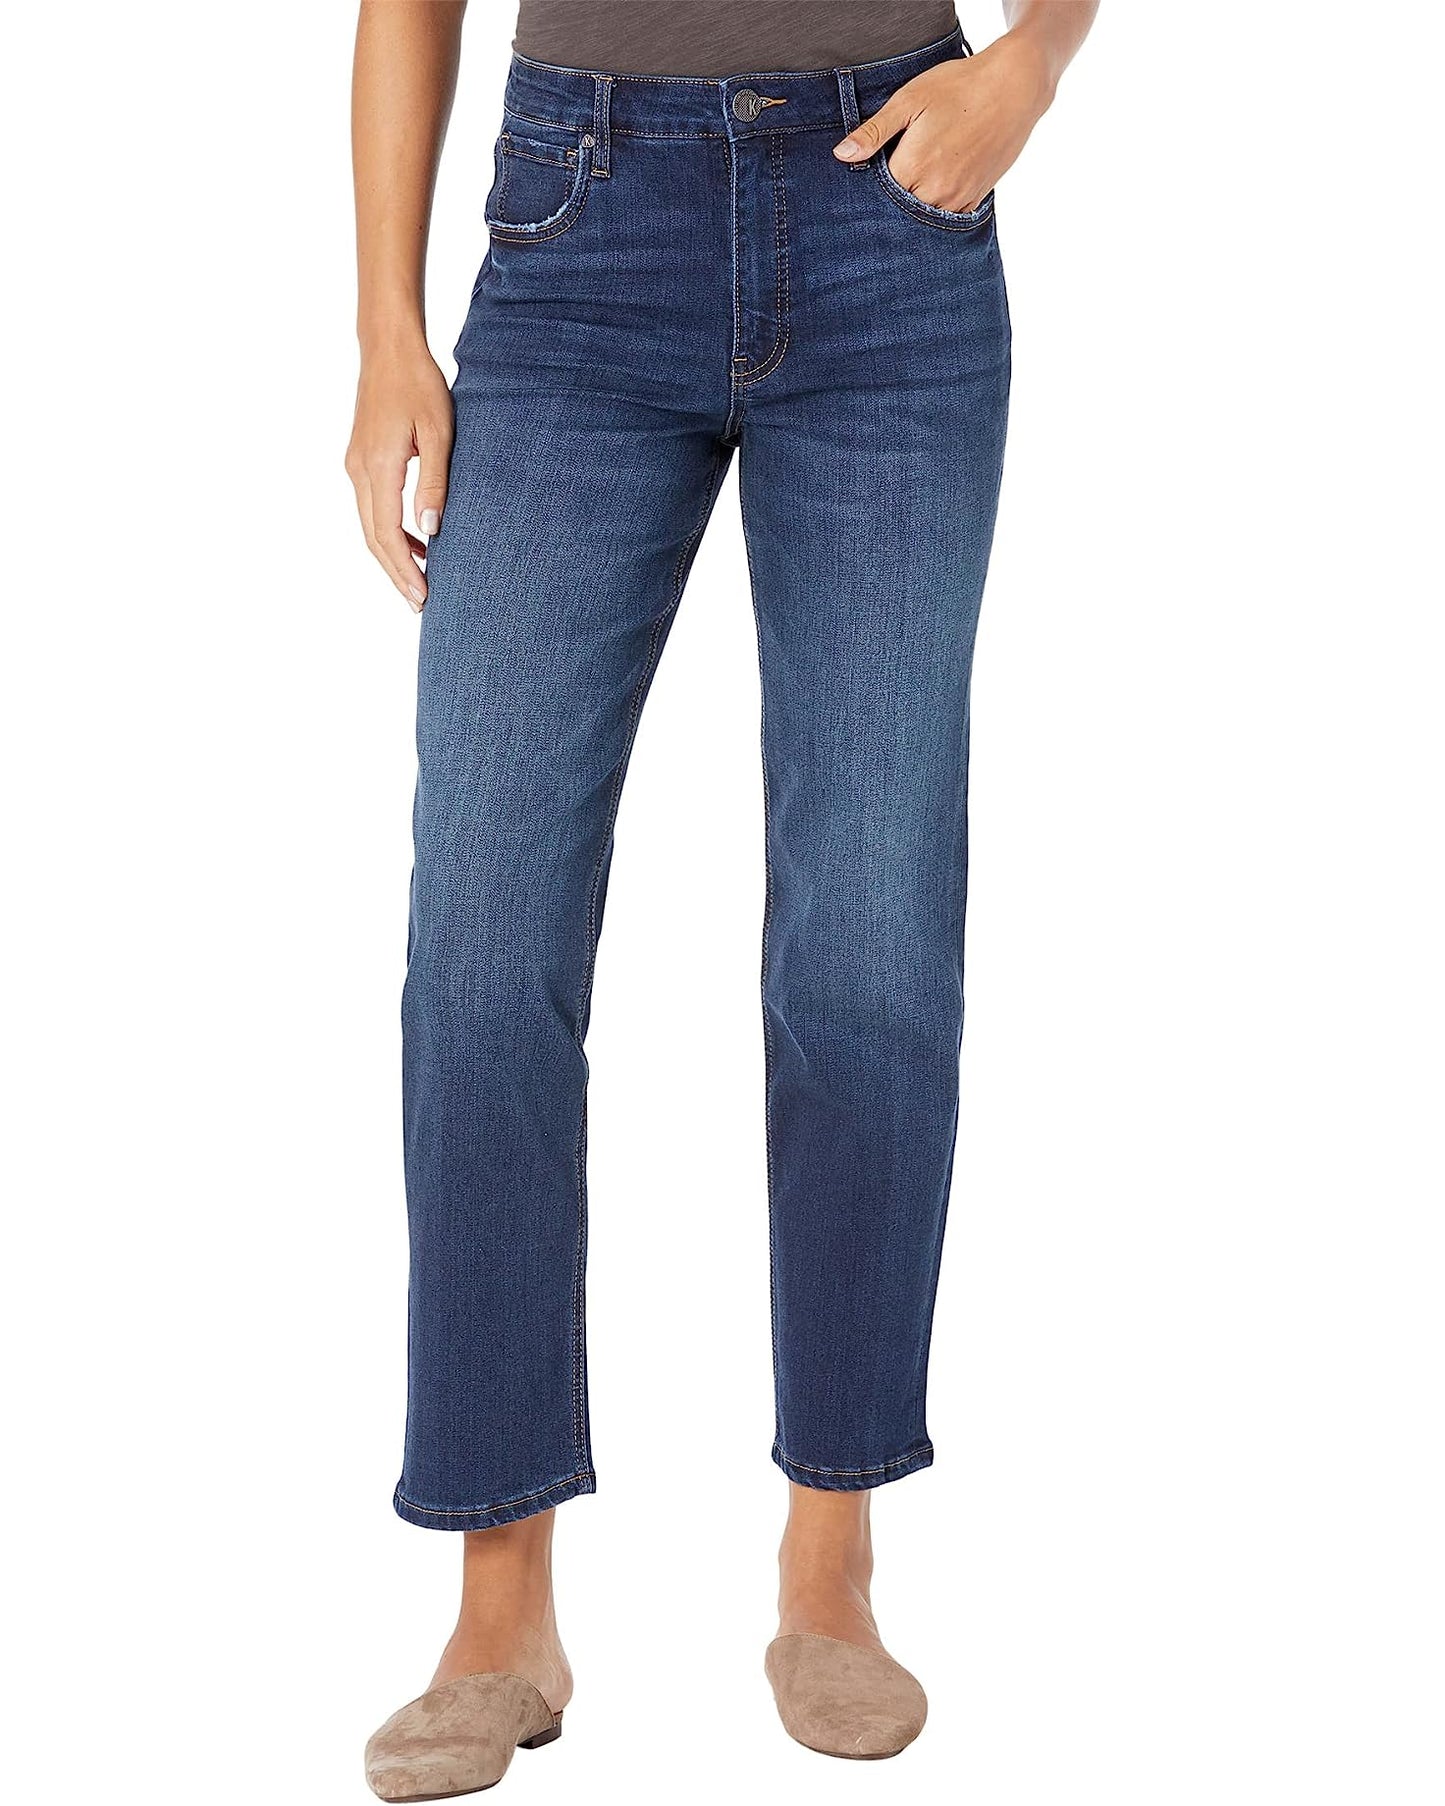 Elizabeth High-Rise Fab AB Straight Pant by Kut from the Kloth in Resounding